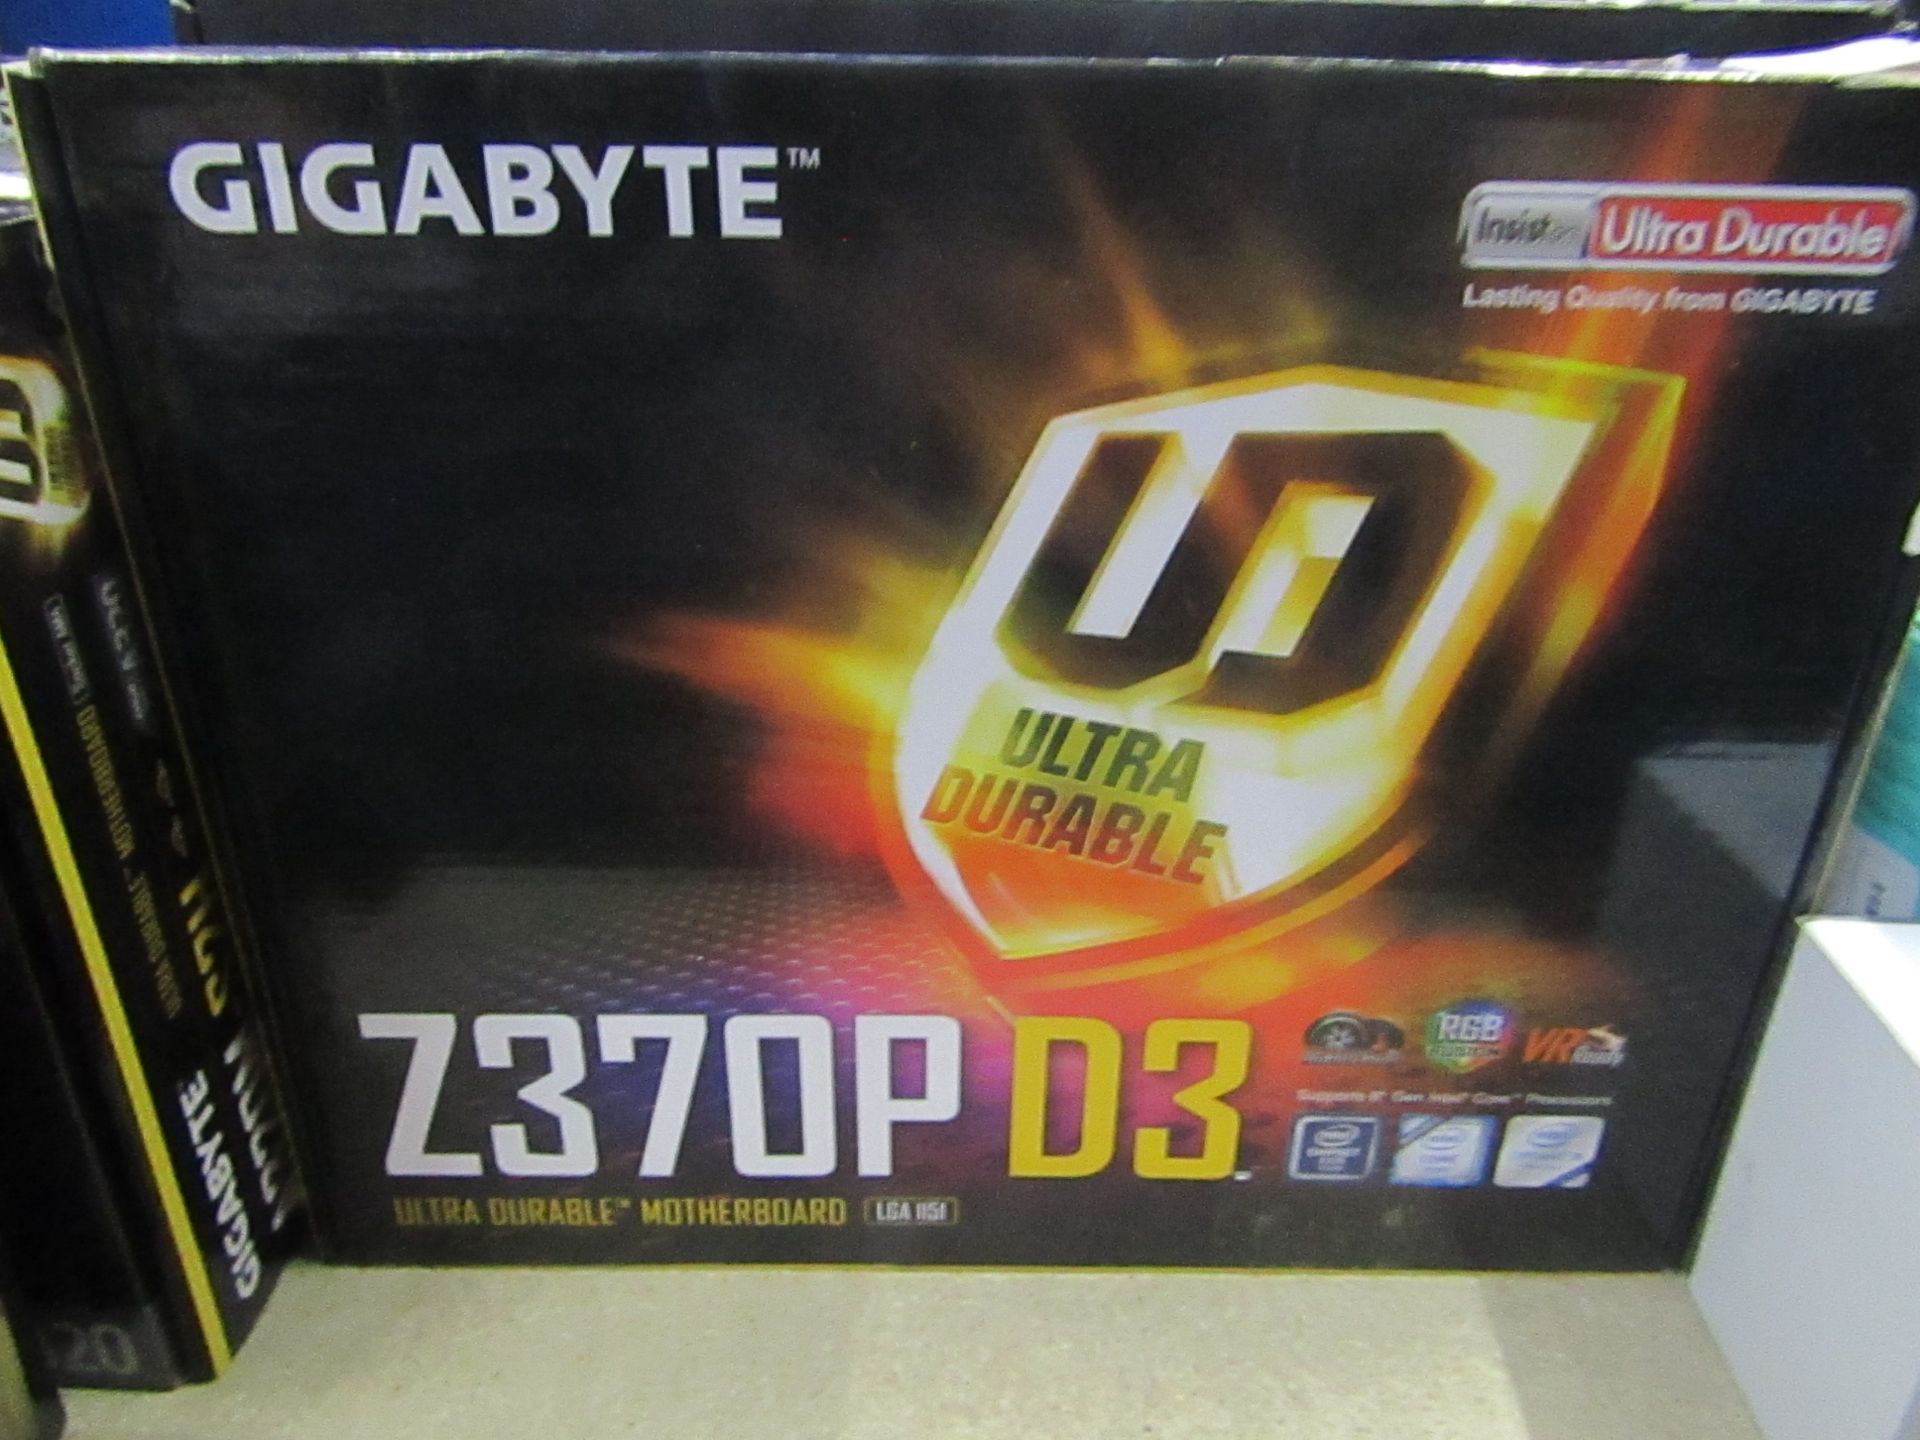 Gigabyte Z370P D3 ultra durable motherboard, untested and boxed.